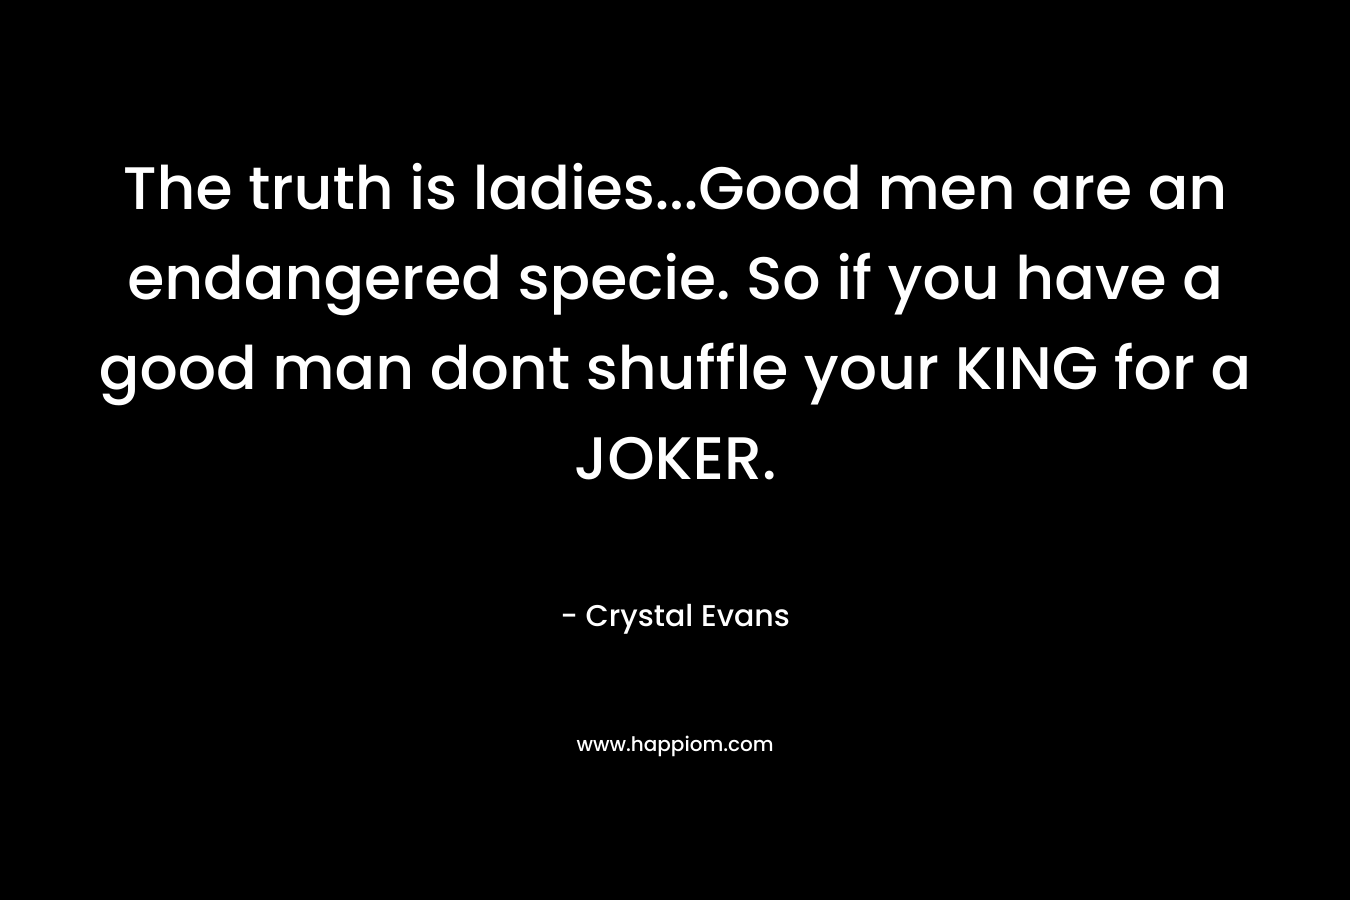 The truth is ladies…Good men are an endangered specie. So if you have a good man dont shuffle your KING for a JOKER. – Crystal Evans